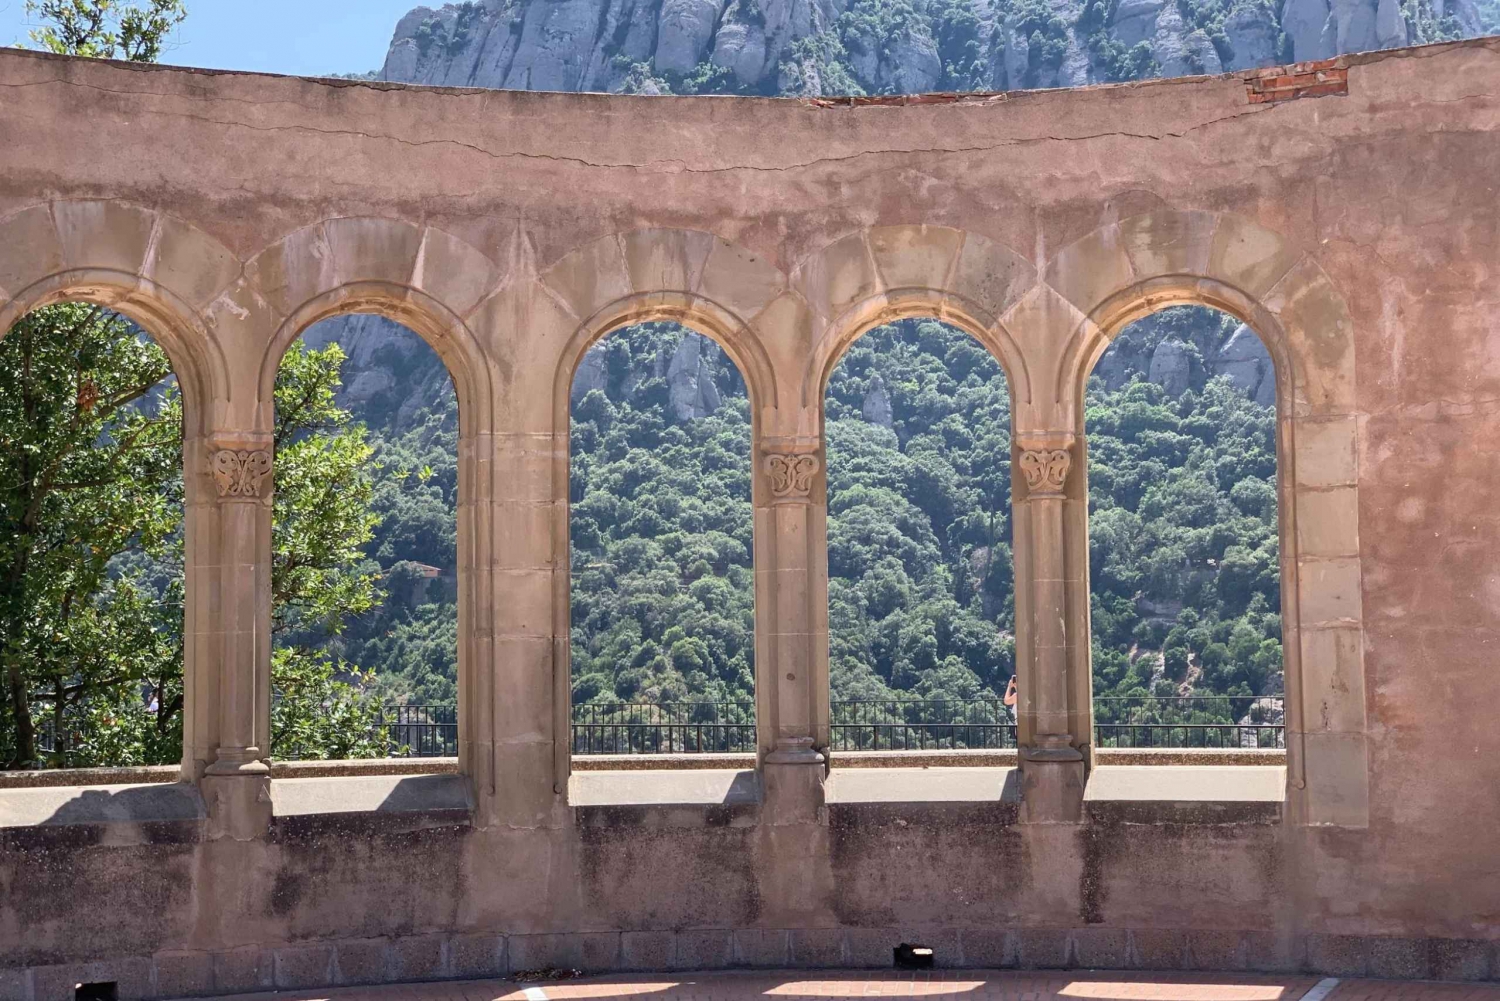 From Barcelona: Half-Day Trip to Montserrat Mountain